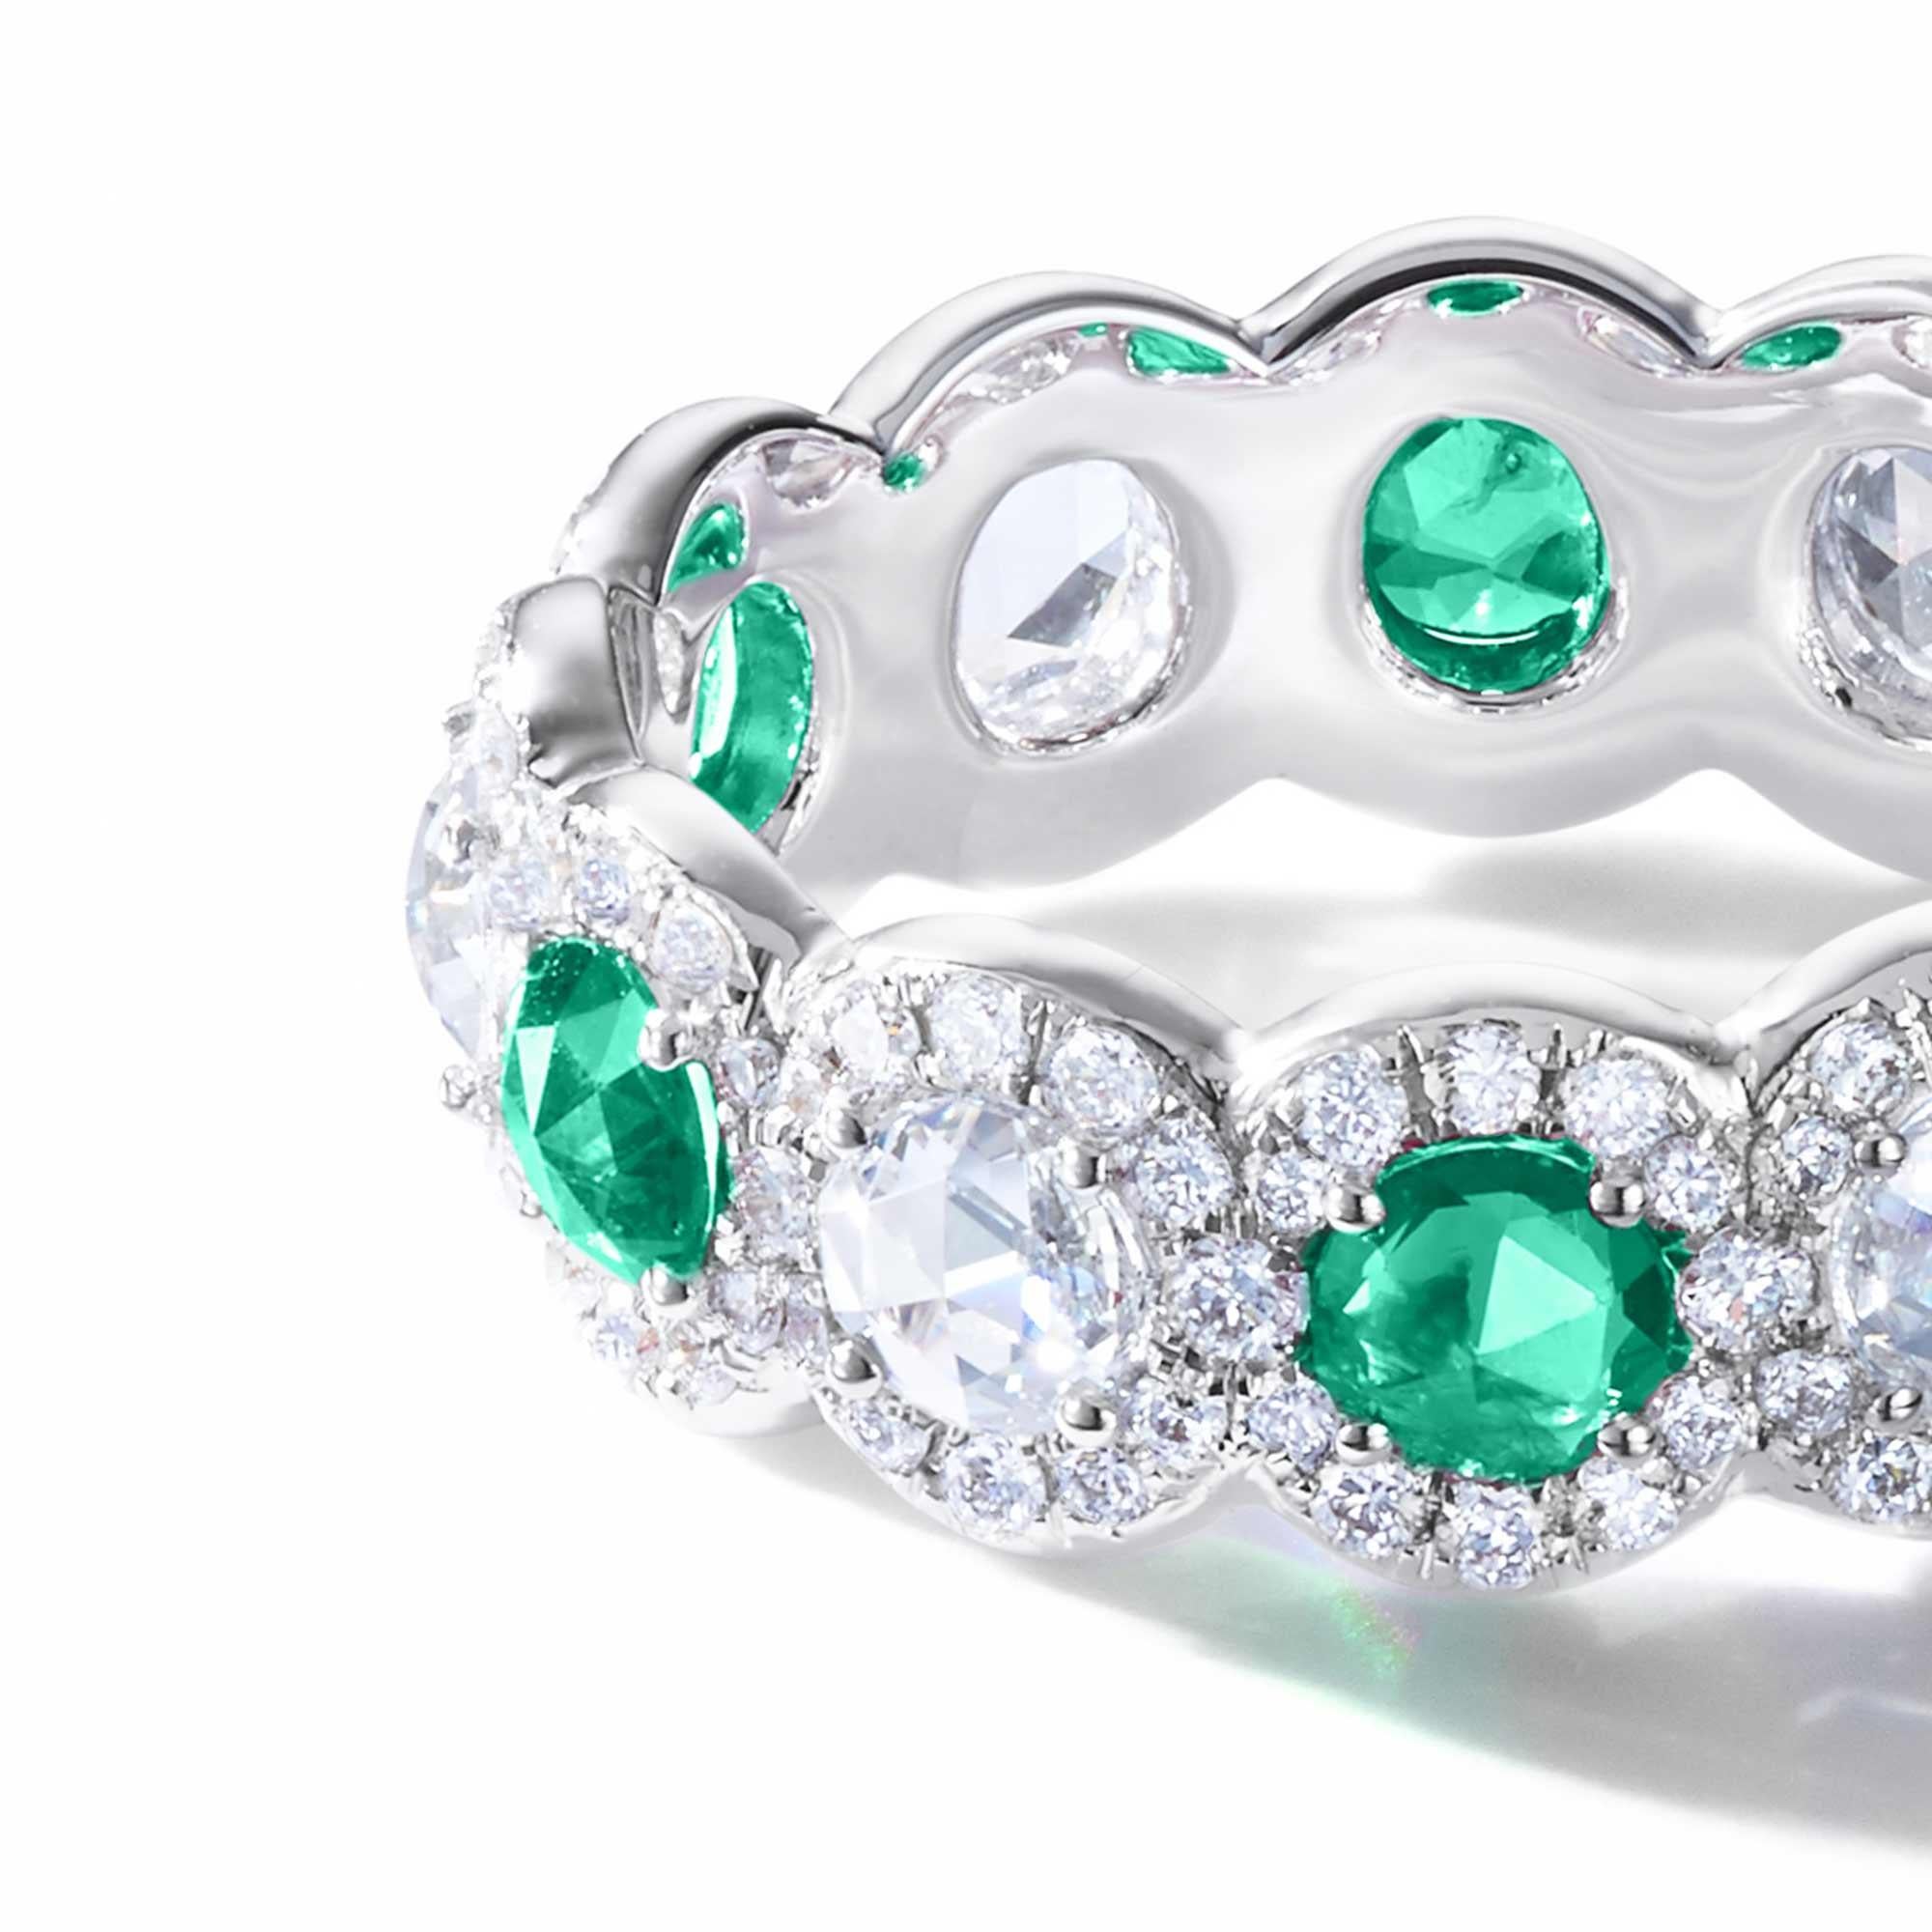 The Elements Ring embodies the light and delicate aesthetic that defines 64Facets’ designs. Our classic Scallop band is rendered even more spectacular with the addition of radiant rose-cut emeralds with alternating rose-cut diamonds and delicately